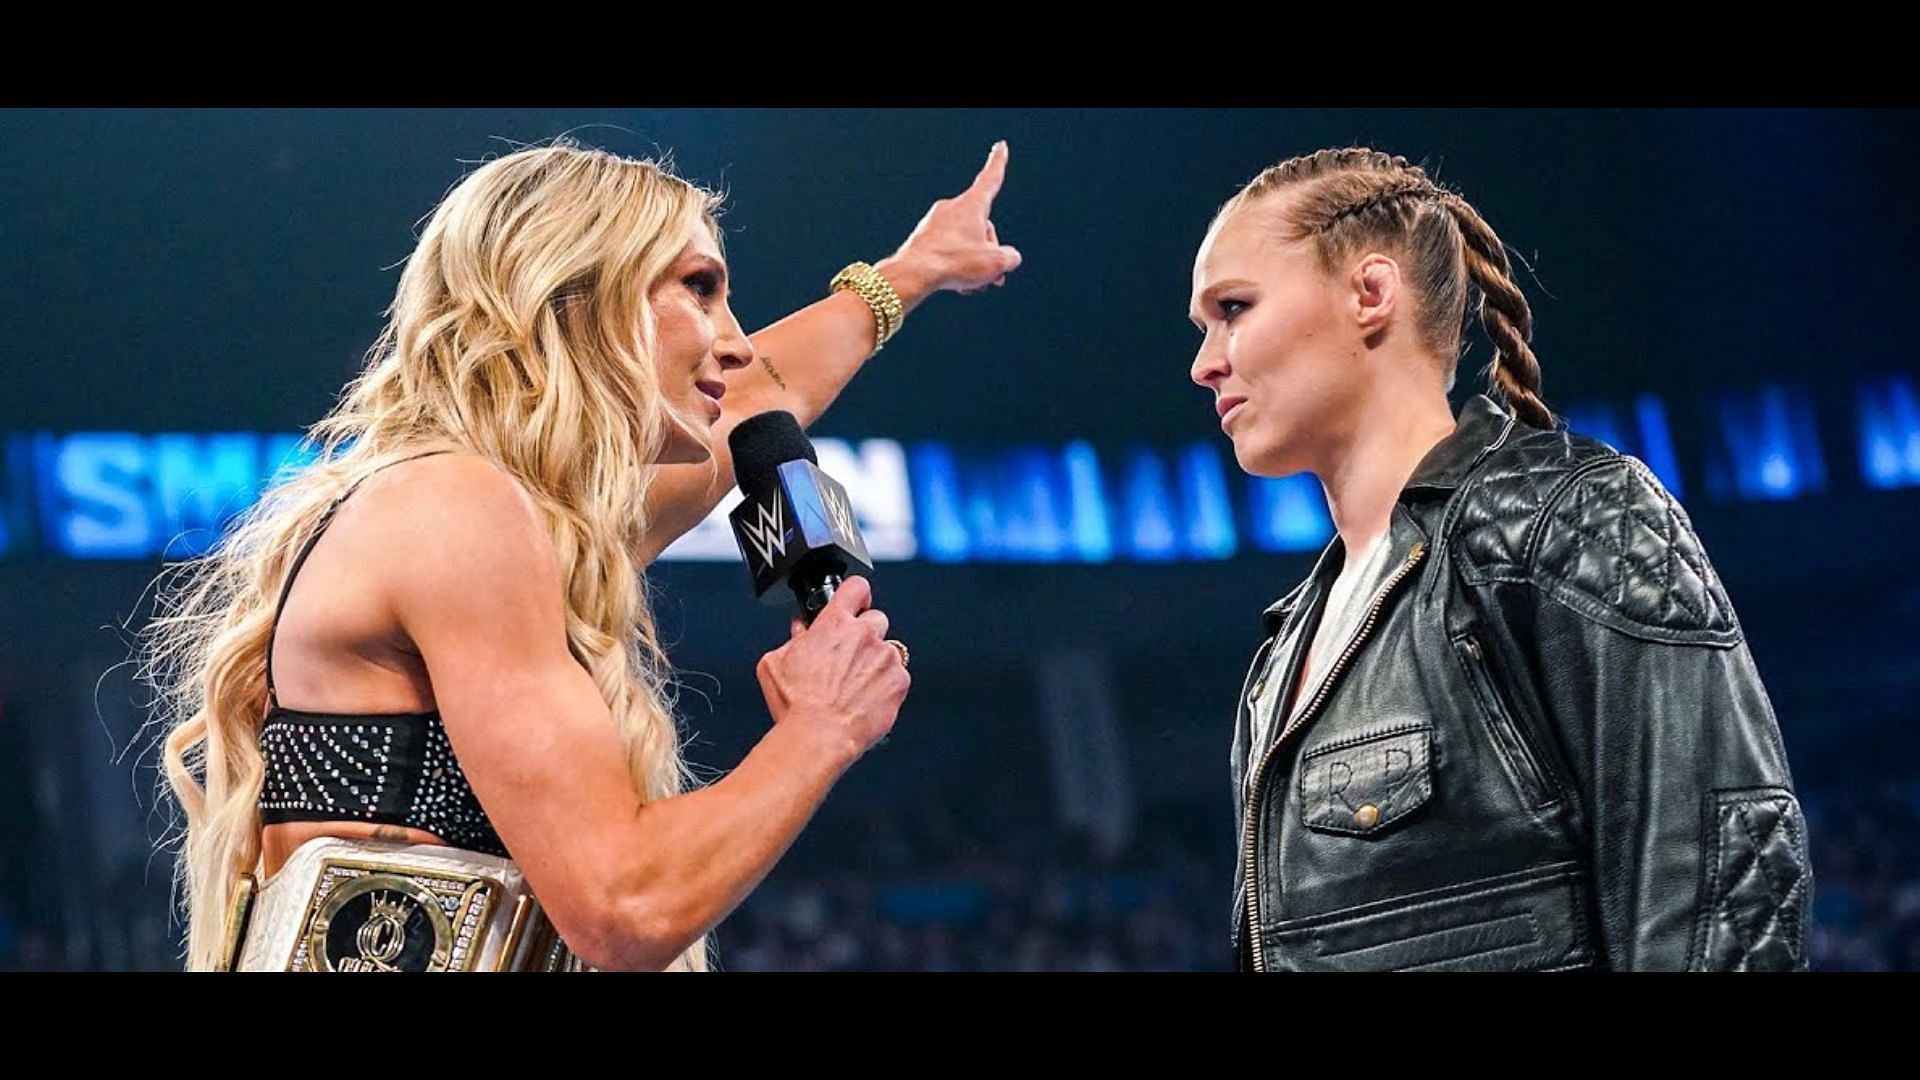 Charlotte Flair and Ronda Rousey began their WWE rivalry back in 2018